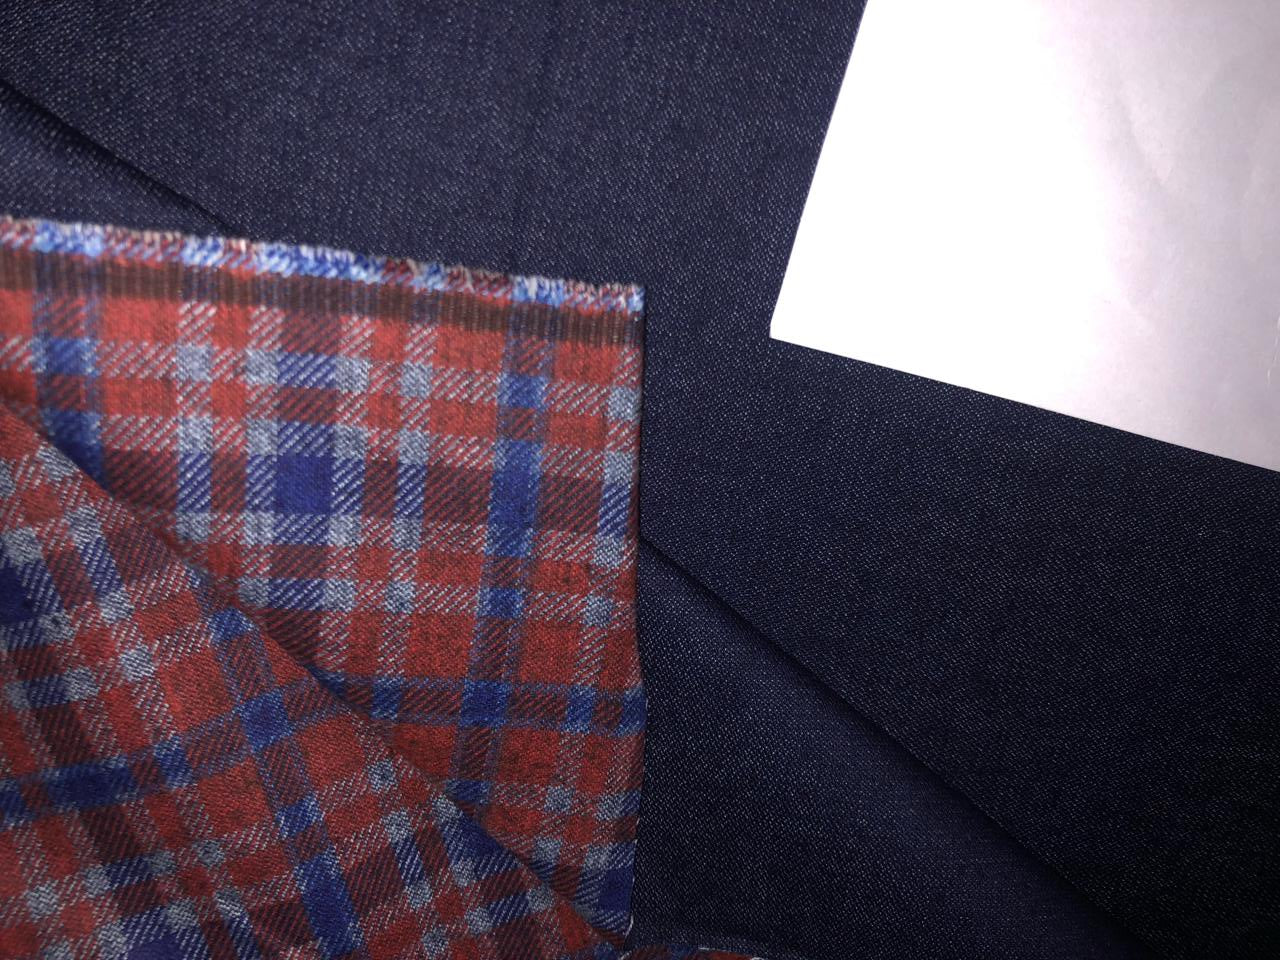 100% Cotton Denim Fabric 58" wide REVERSABLE available in 2 colors red and blue plaids with a solid denim blue reverse AND a blue purple plaid with a solid blue reverse with a [15747/48]